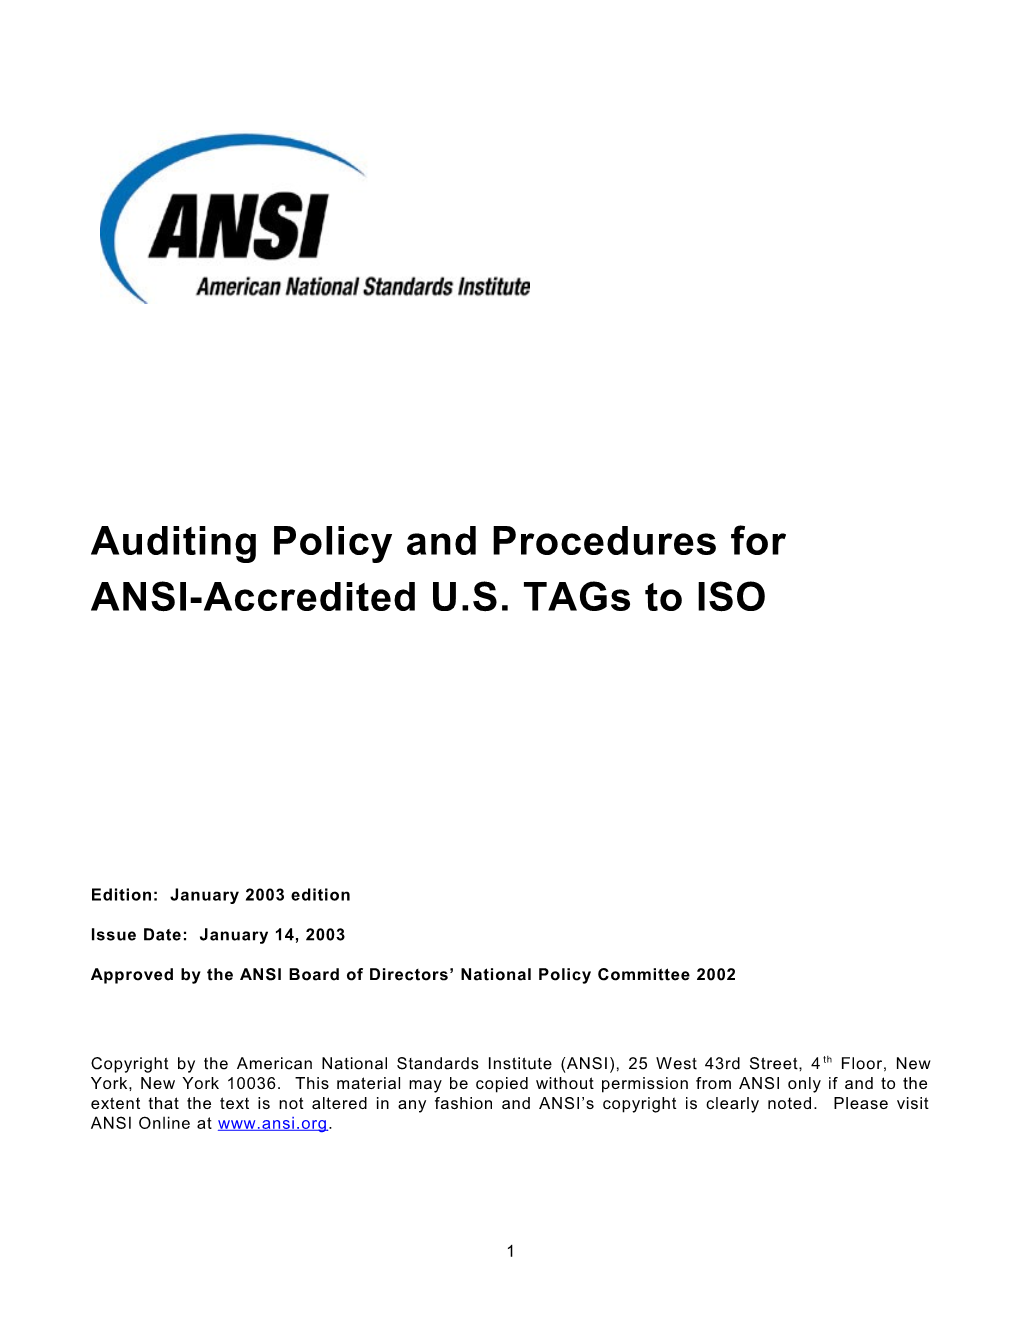 Auditing Policy and Procedures for ANSI Accredited US Tags to ISO (2003)